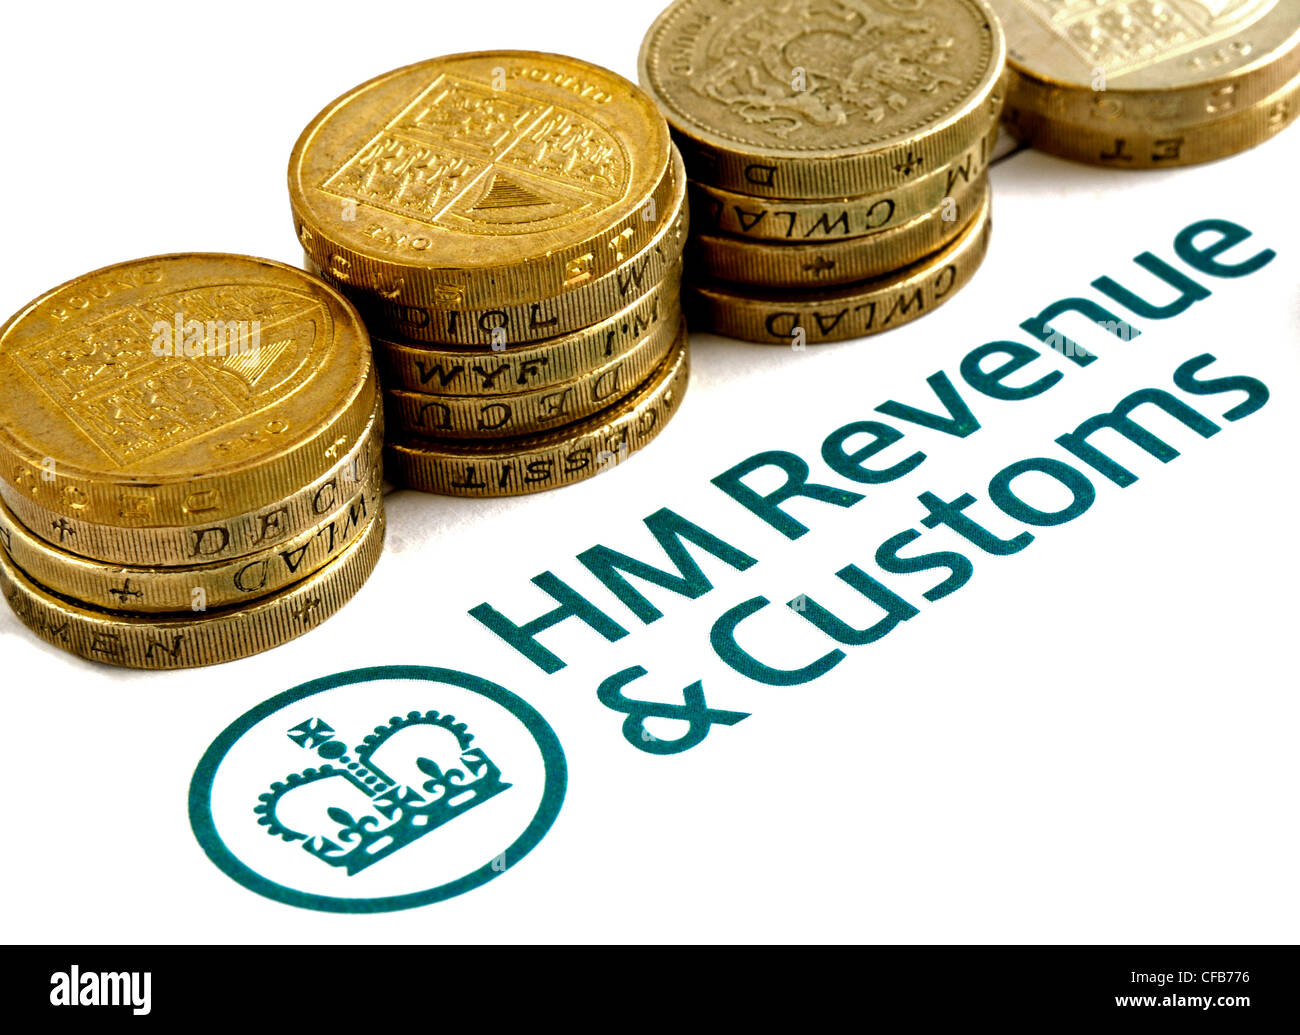 hm-revenue-customs-tax-return-form-and-coins-stock-photo-alamy